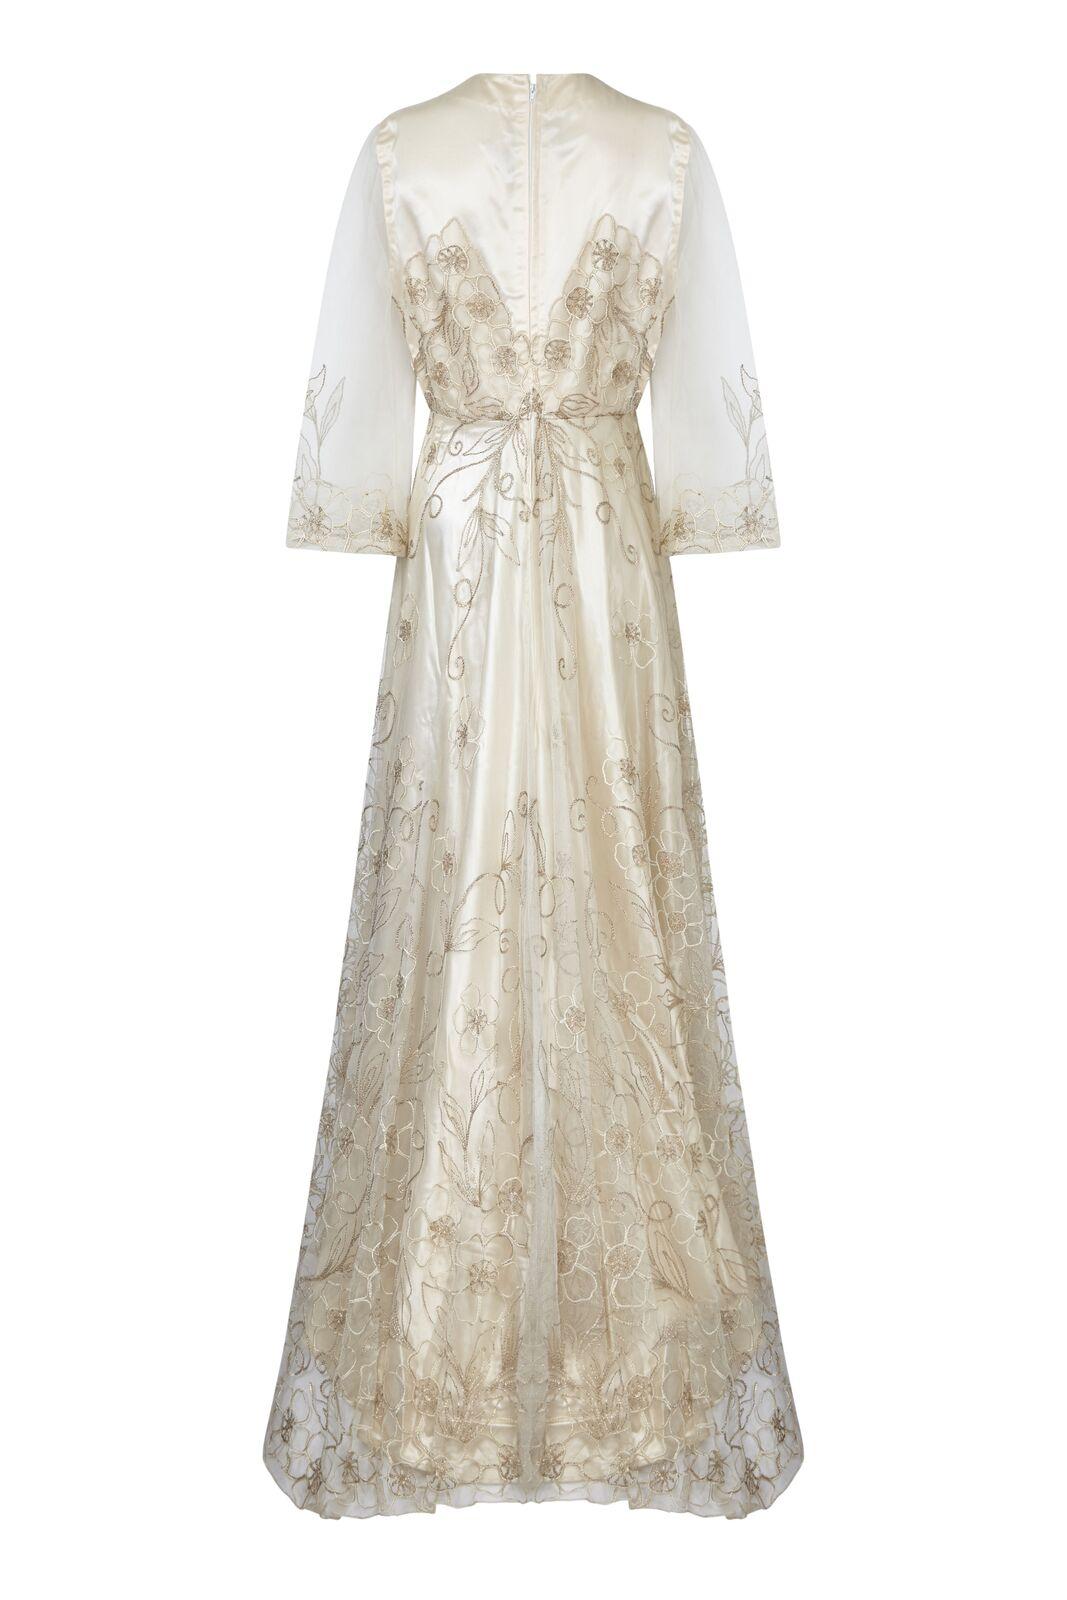 This enchanting late 1950s wedding dress in warm ivory with delicate floral embroidery is in superb condition and has a simple feminine silhouette. The thick sateen underlay is a sleeveless shift cut with a modest round neck, neatly synched at the